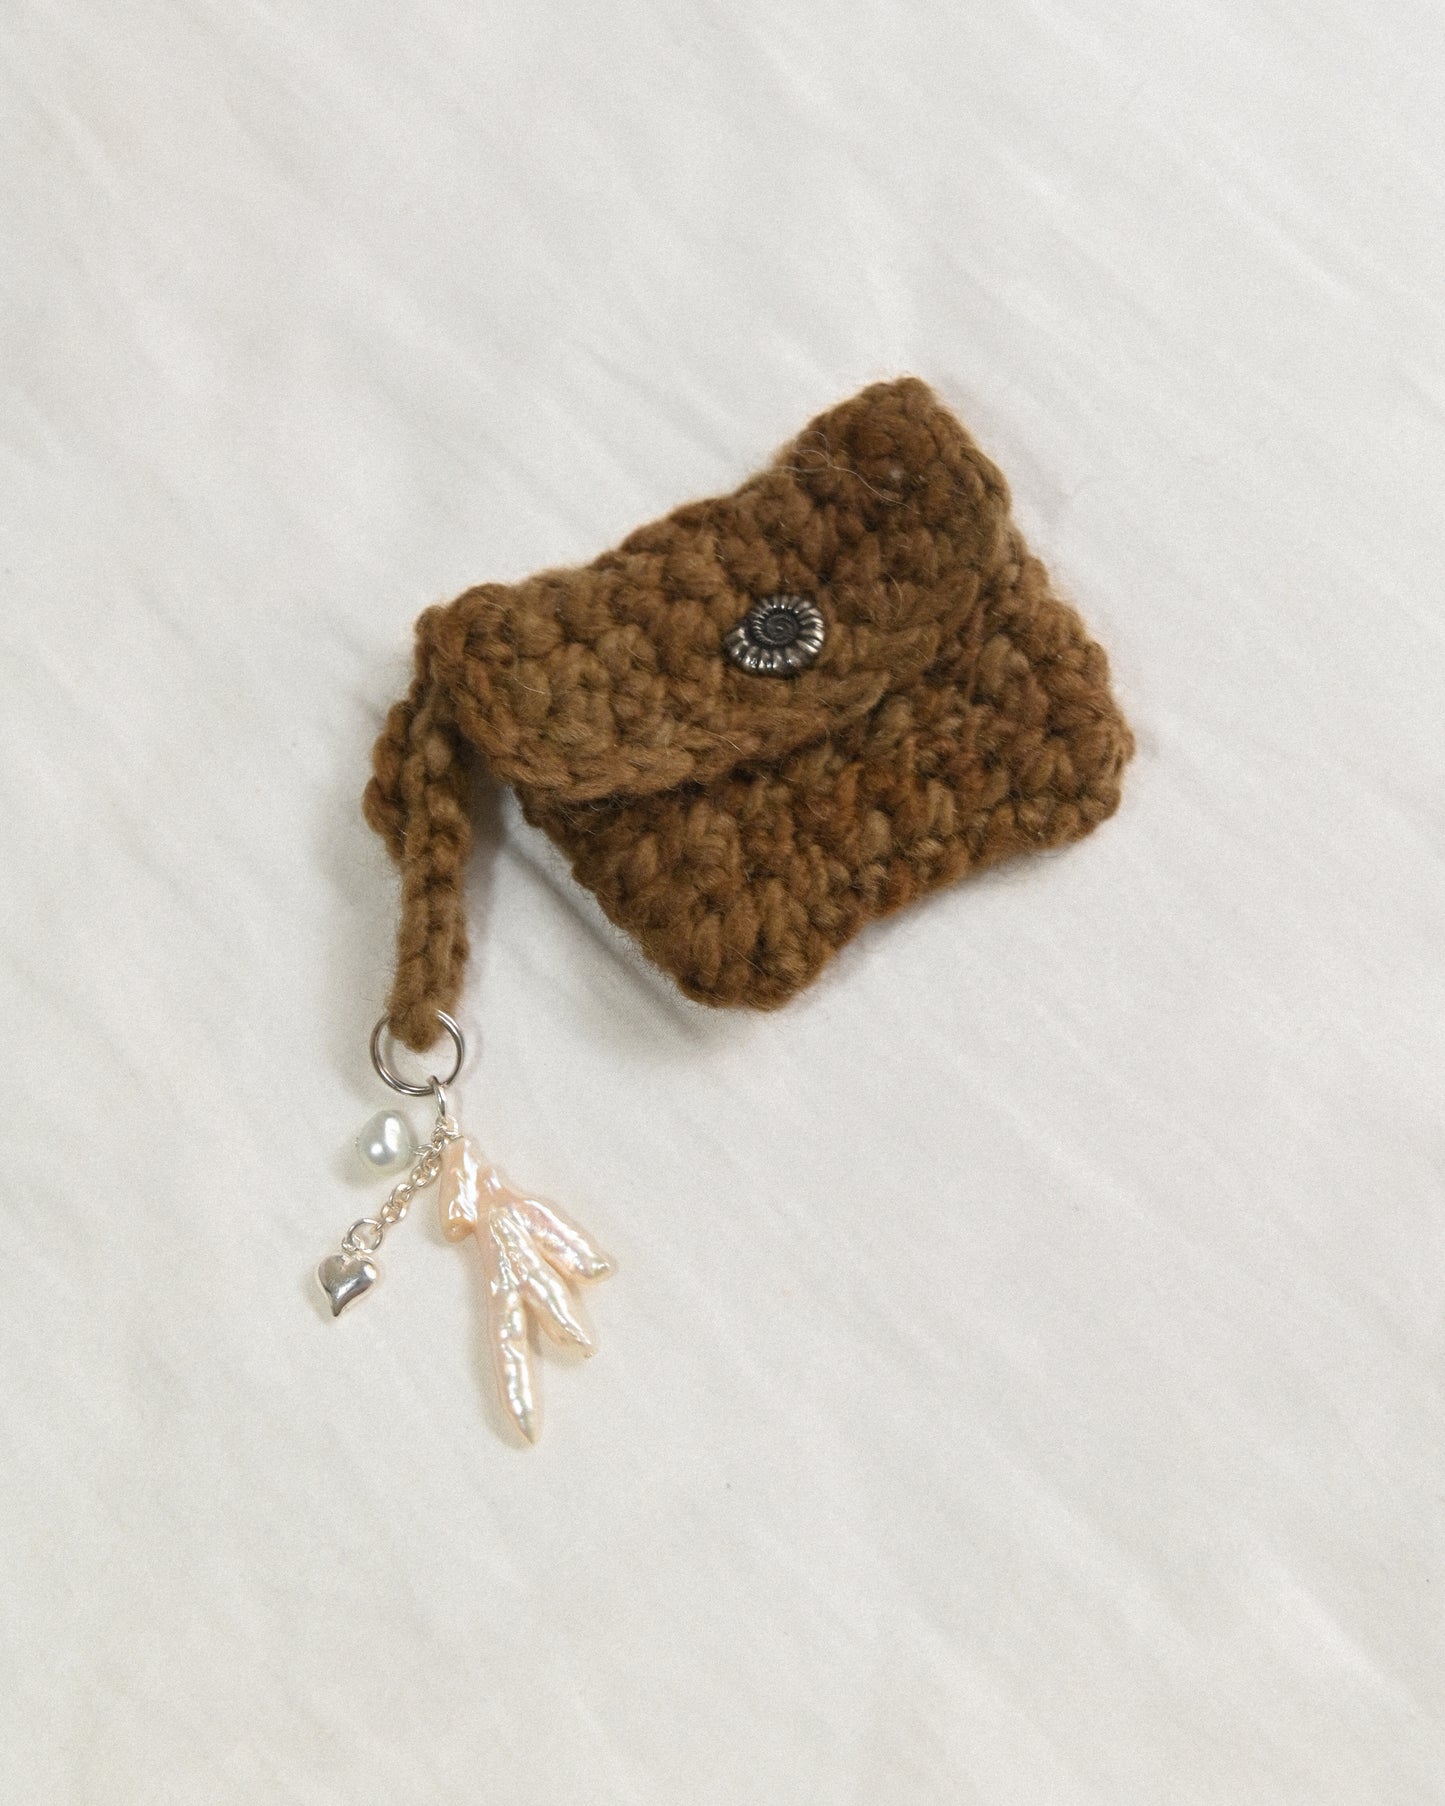 M&D x UHM coin purse with charms